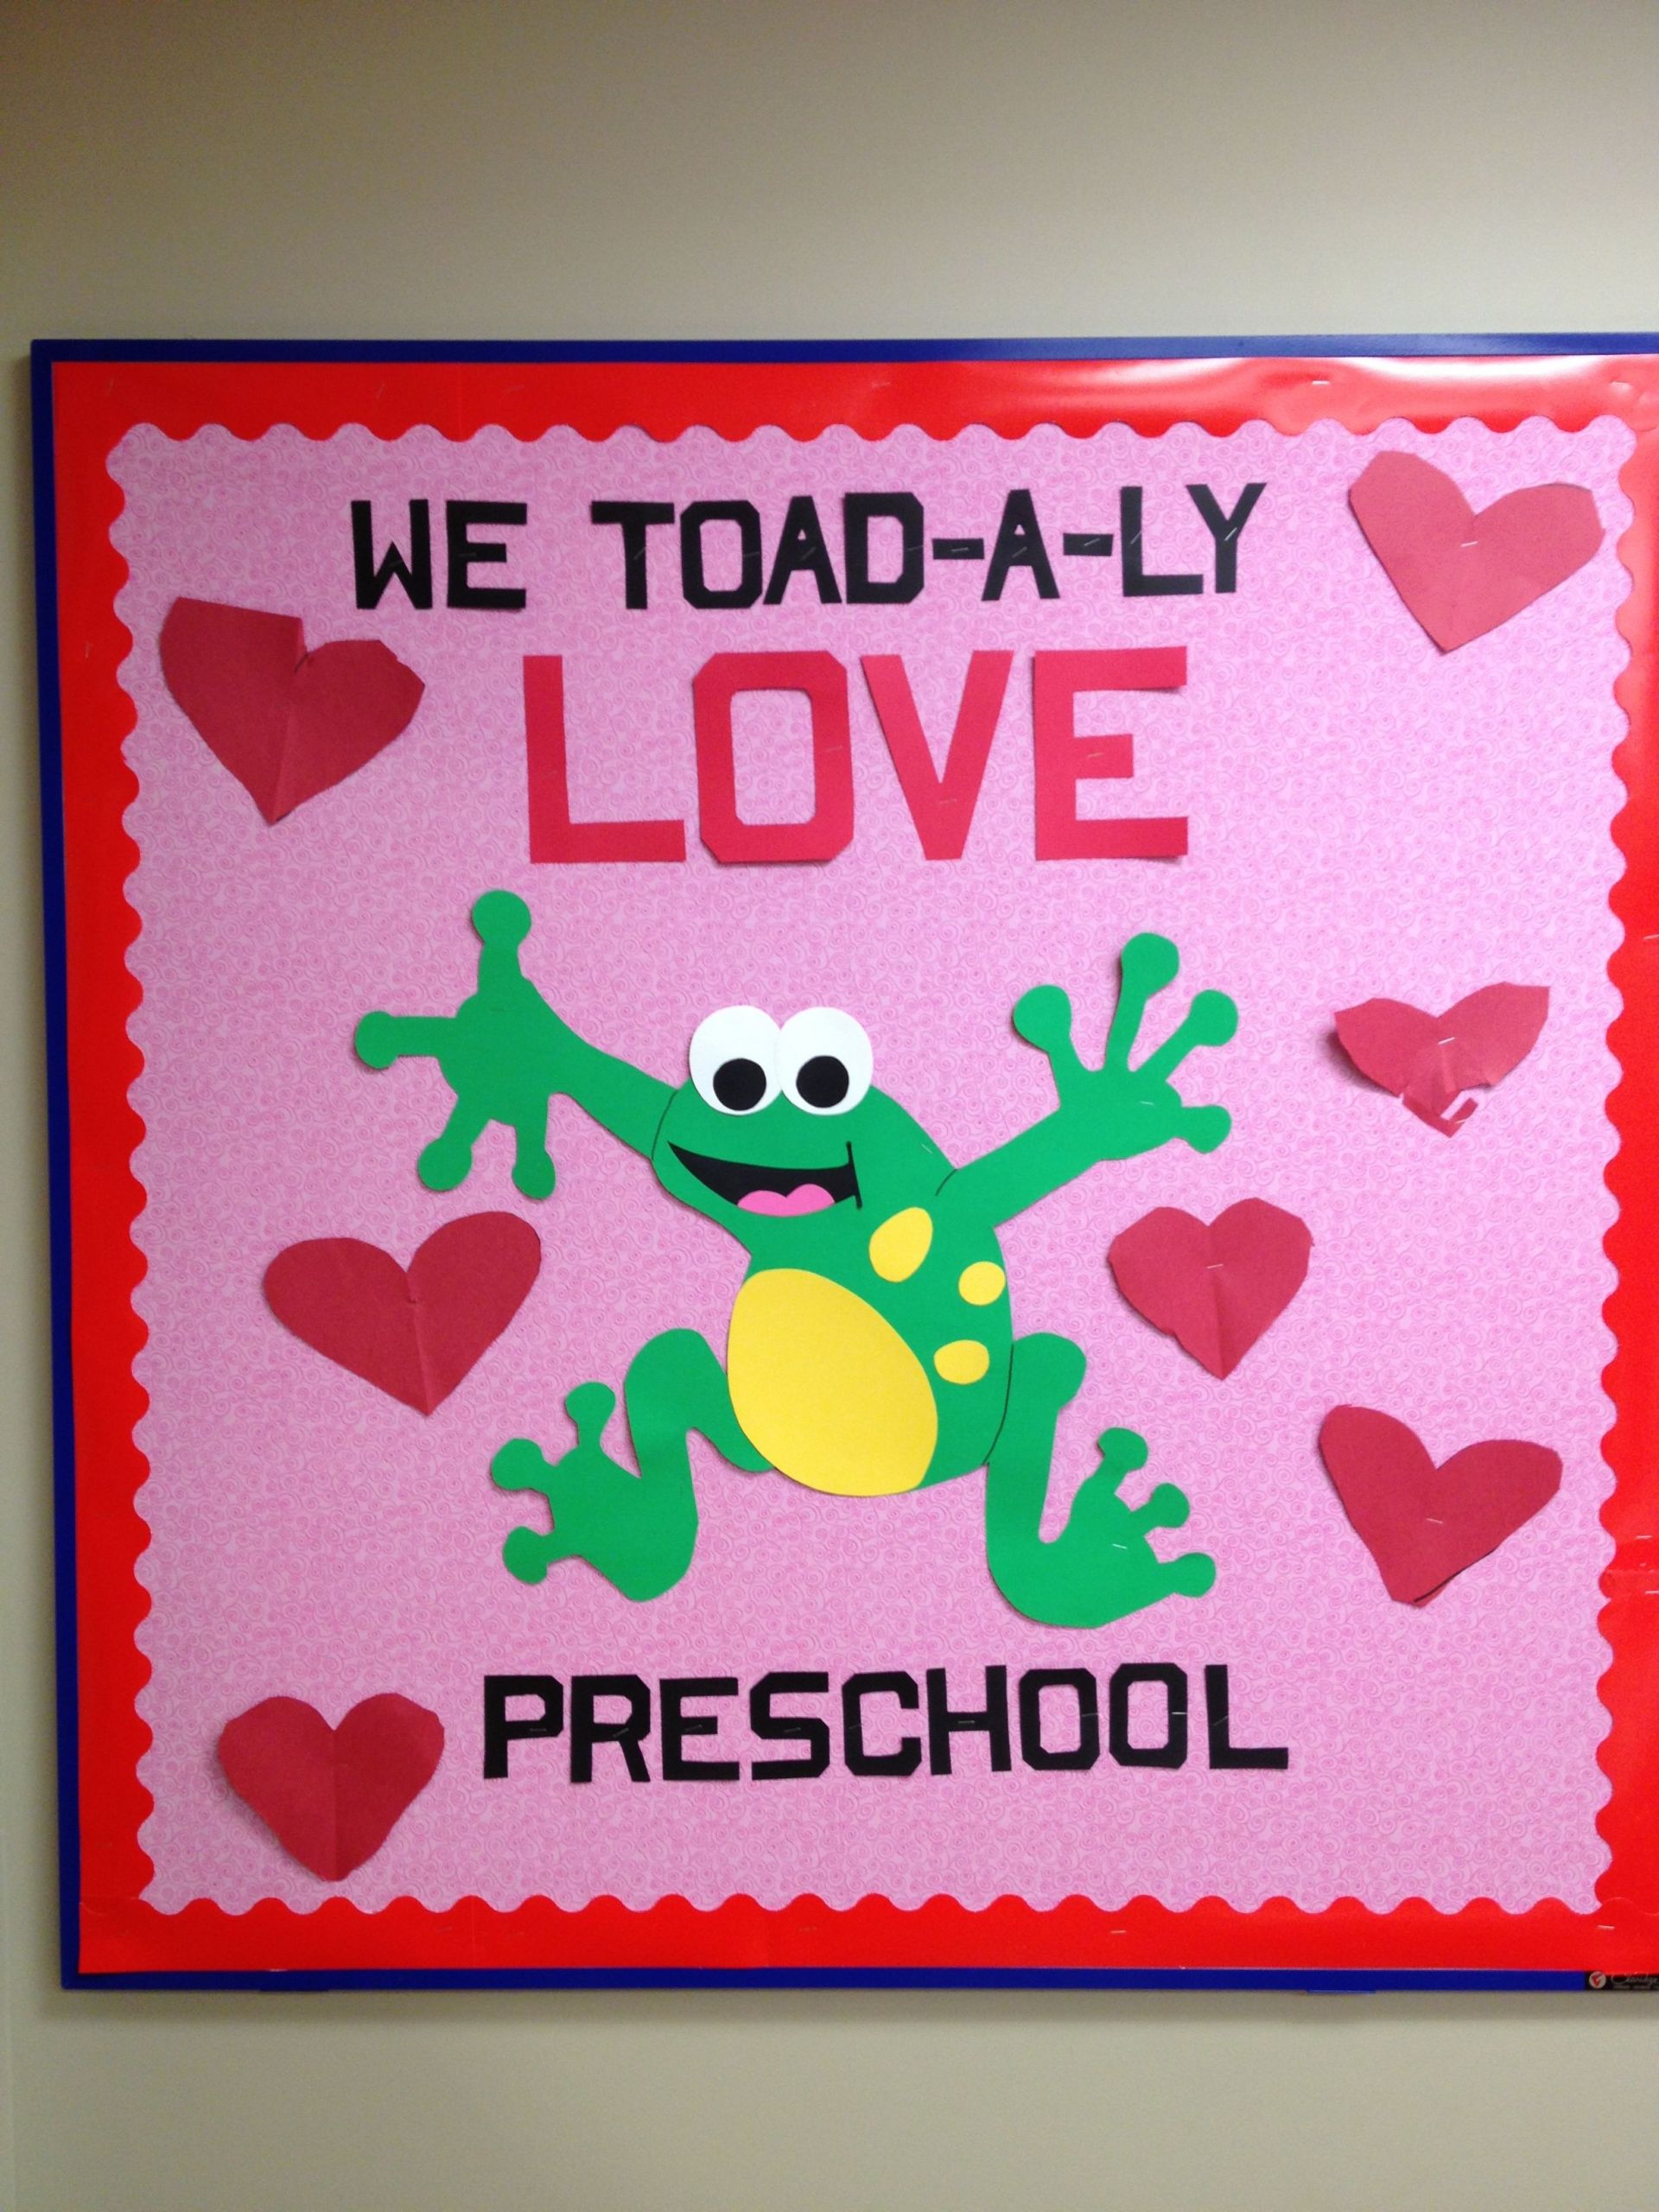 Valentines Day Bulletin Board Ideas For Preschool
 My valentines preschool board